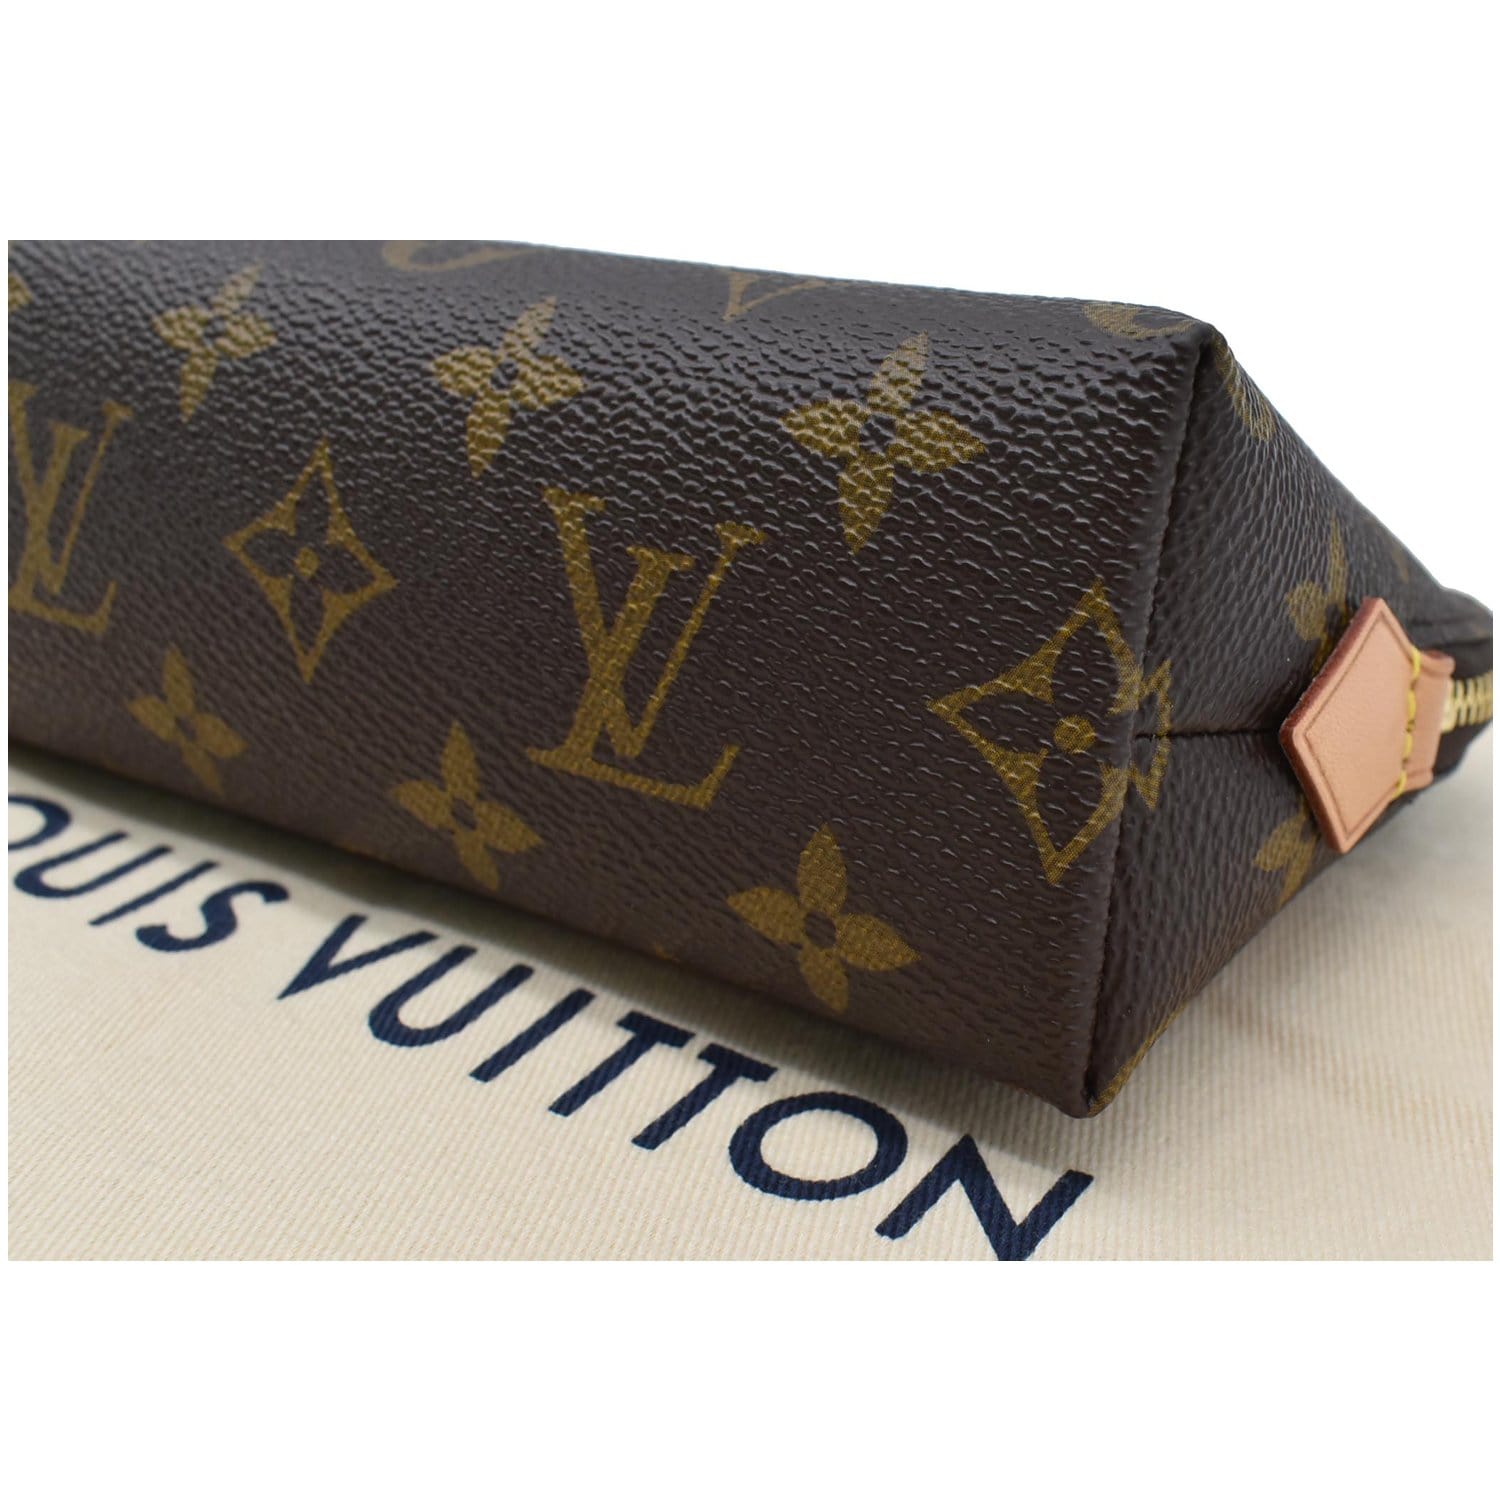 Louis Vuitton Monogram Cosmetic Pouch PM - Brown Cosmetic Bags, Accessories  - LOU770282